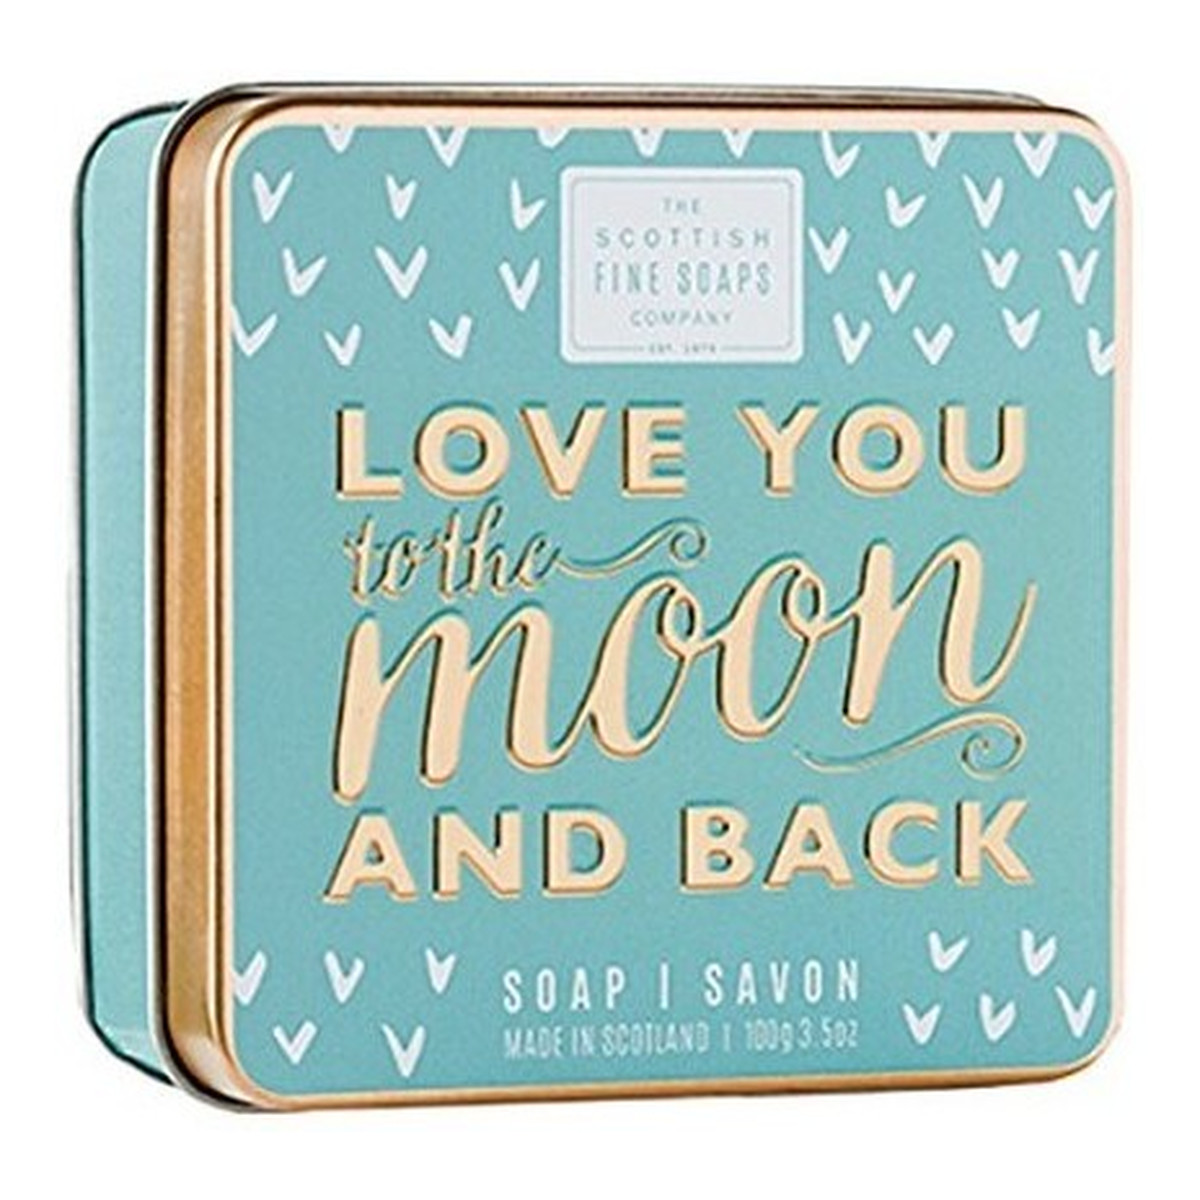 The Scottish Fine Soaps Love You To The Moon And Back Soap In A Tin Mydło w puszce 100g